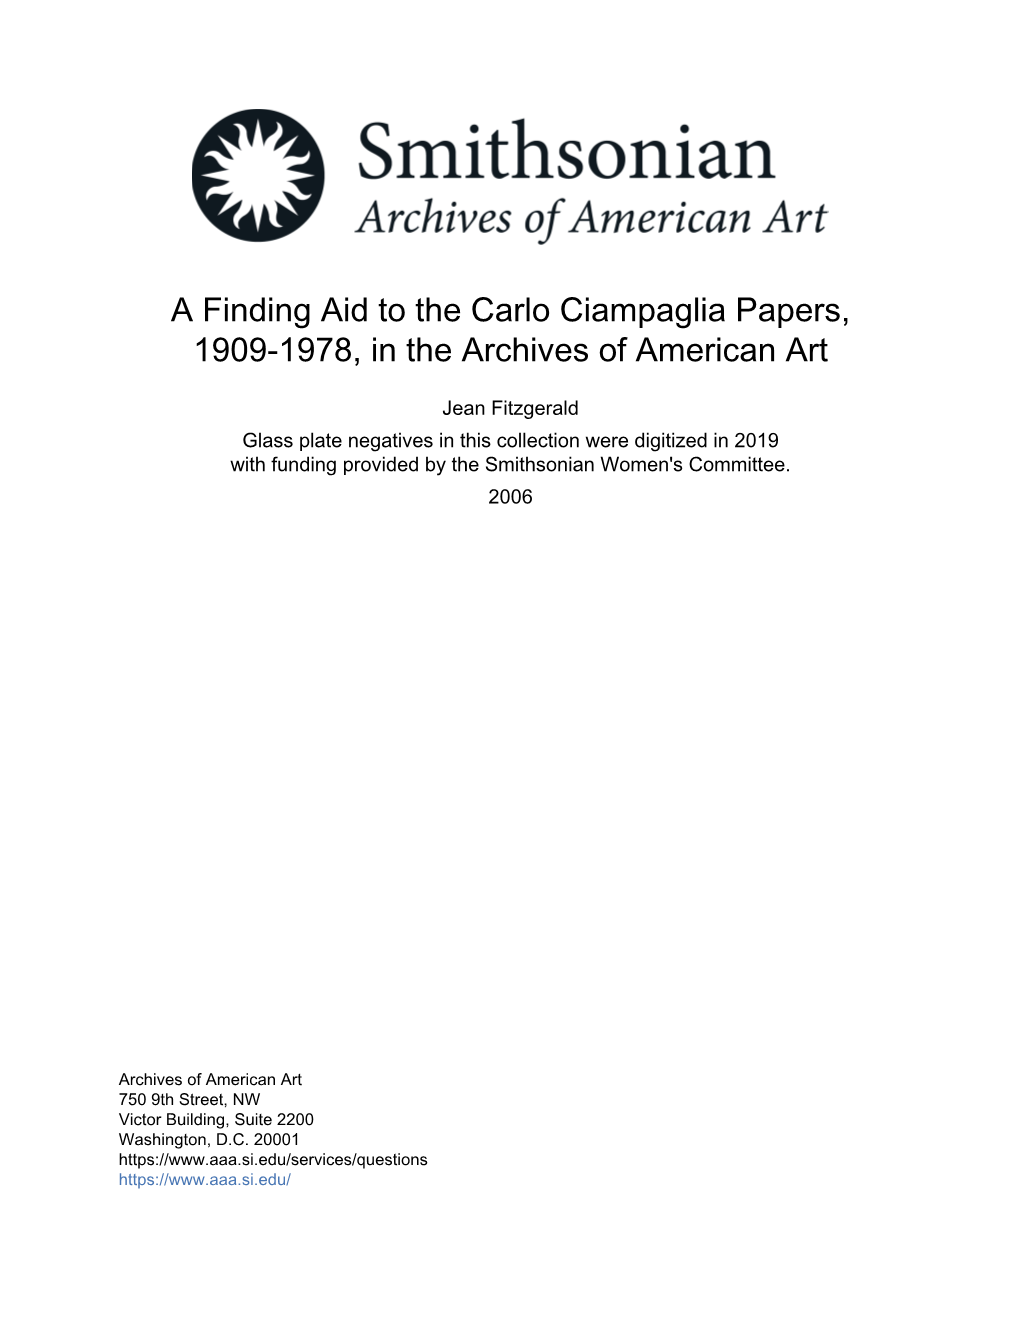 A Finding Aid to the Carlo Ciampaglia Papers, 1909-1978, in the Archives of American Art